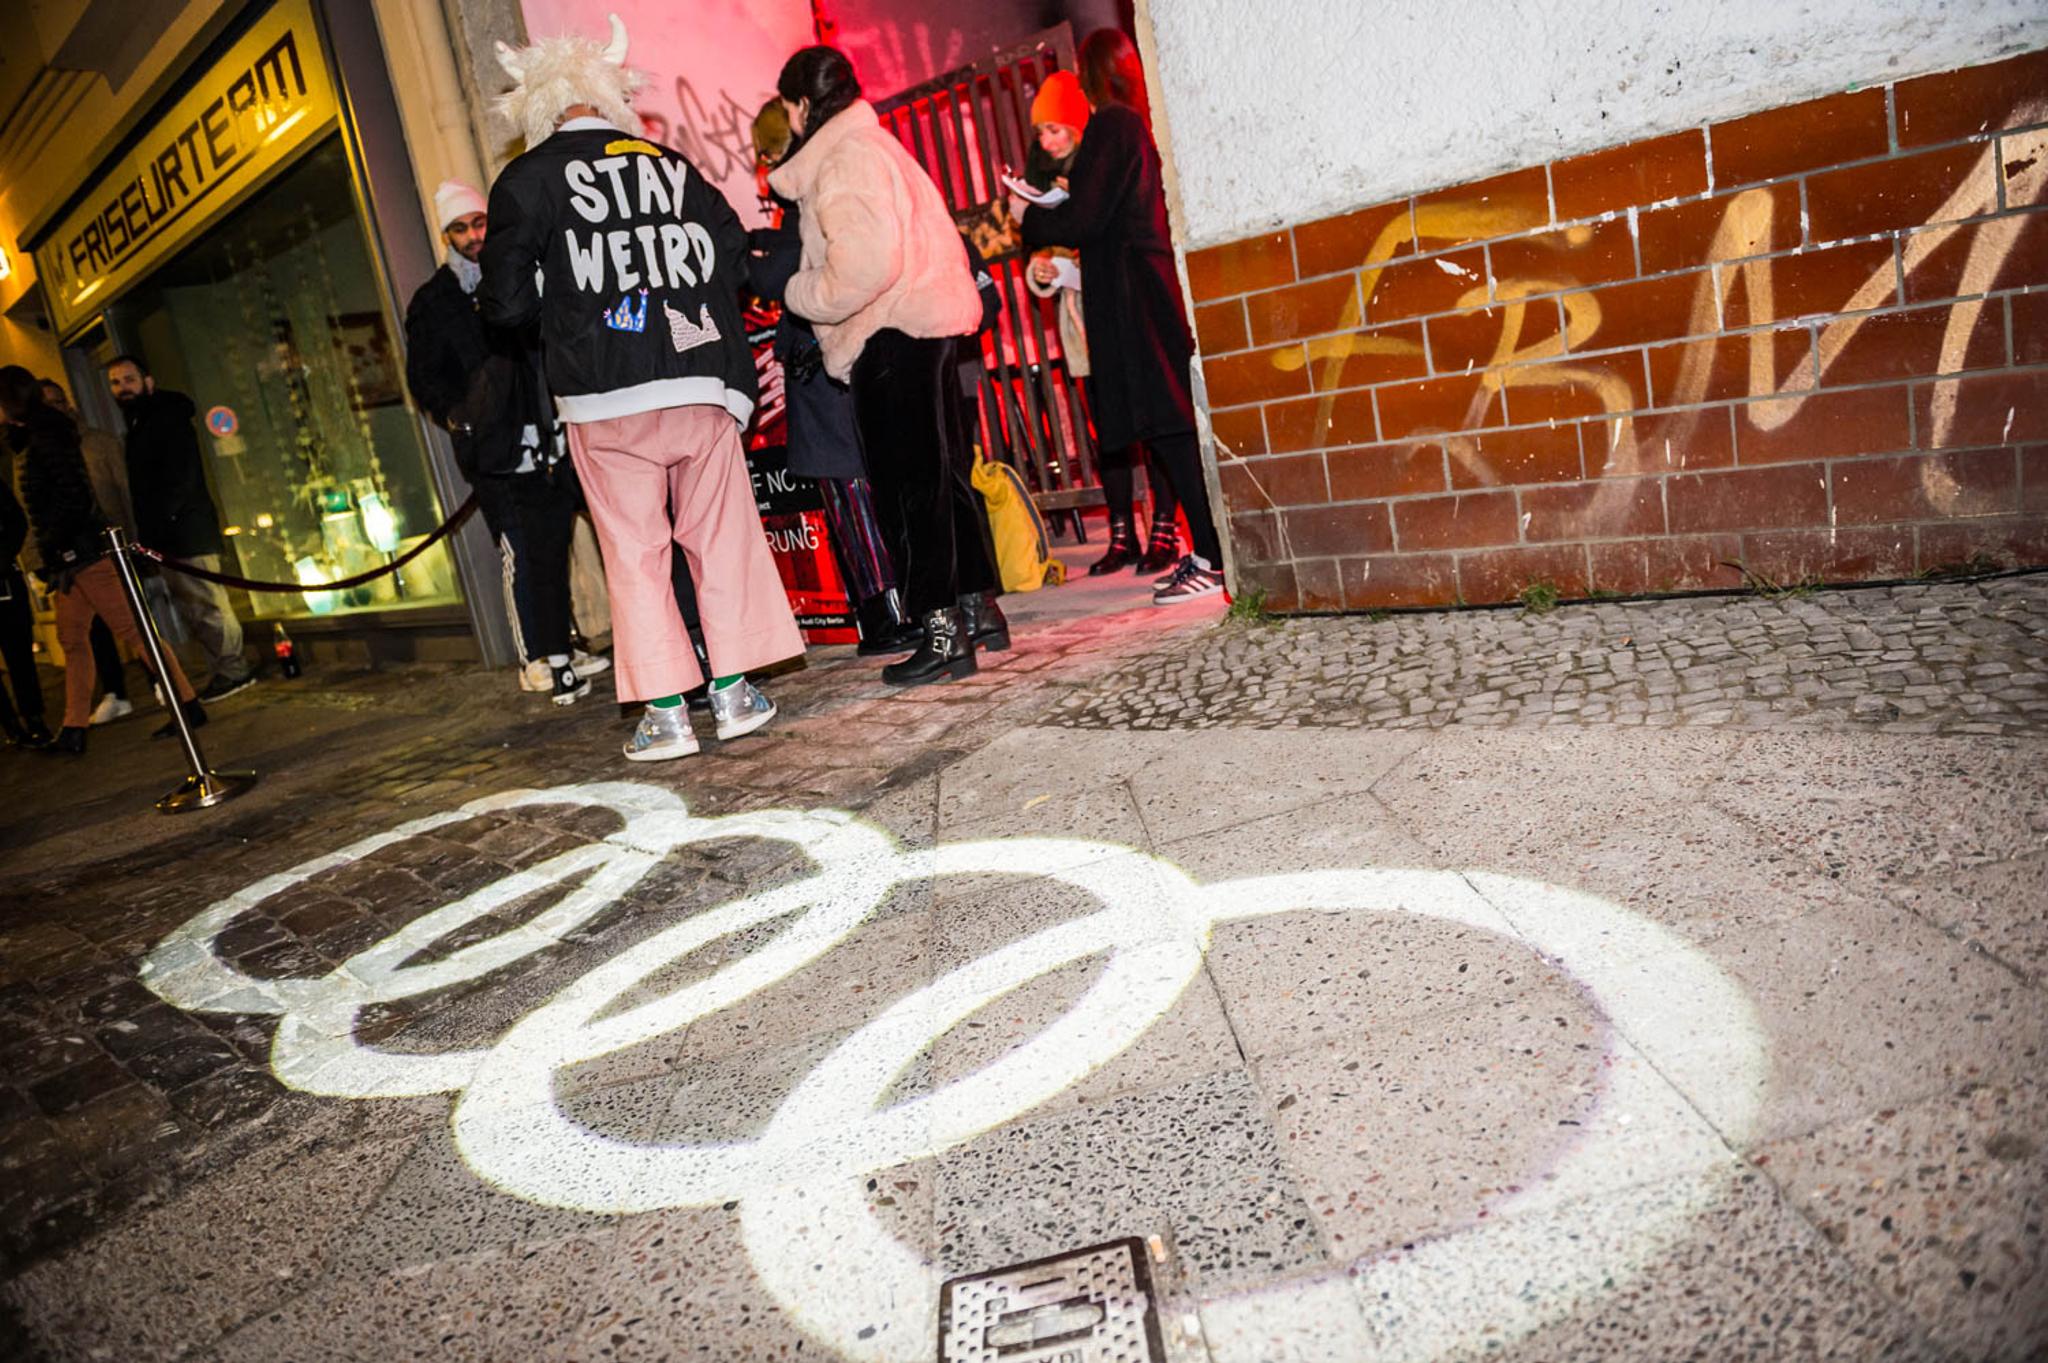 The Audi logo, 4 horizontal overlapping white circles, are projected onto the sidewalk. A yellow tag on the wall reads, hastily written, "FBM." A group of about 5 people stand outside of the door to the event. There is a black velvet rope designating where the queue is. A person in pink trousers, a blazer with "stay weird" written on the back, and a fuzzy hat with horns on it, sticks out from the crowd. We are next door to a salon.